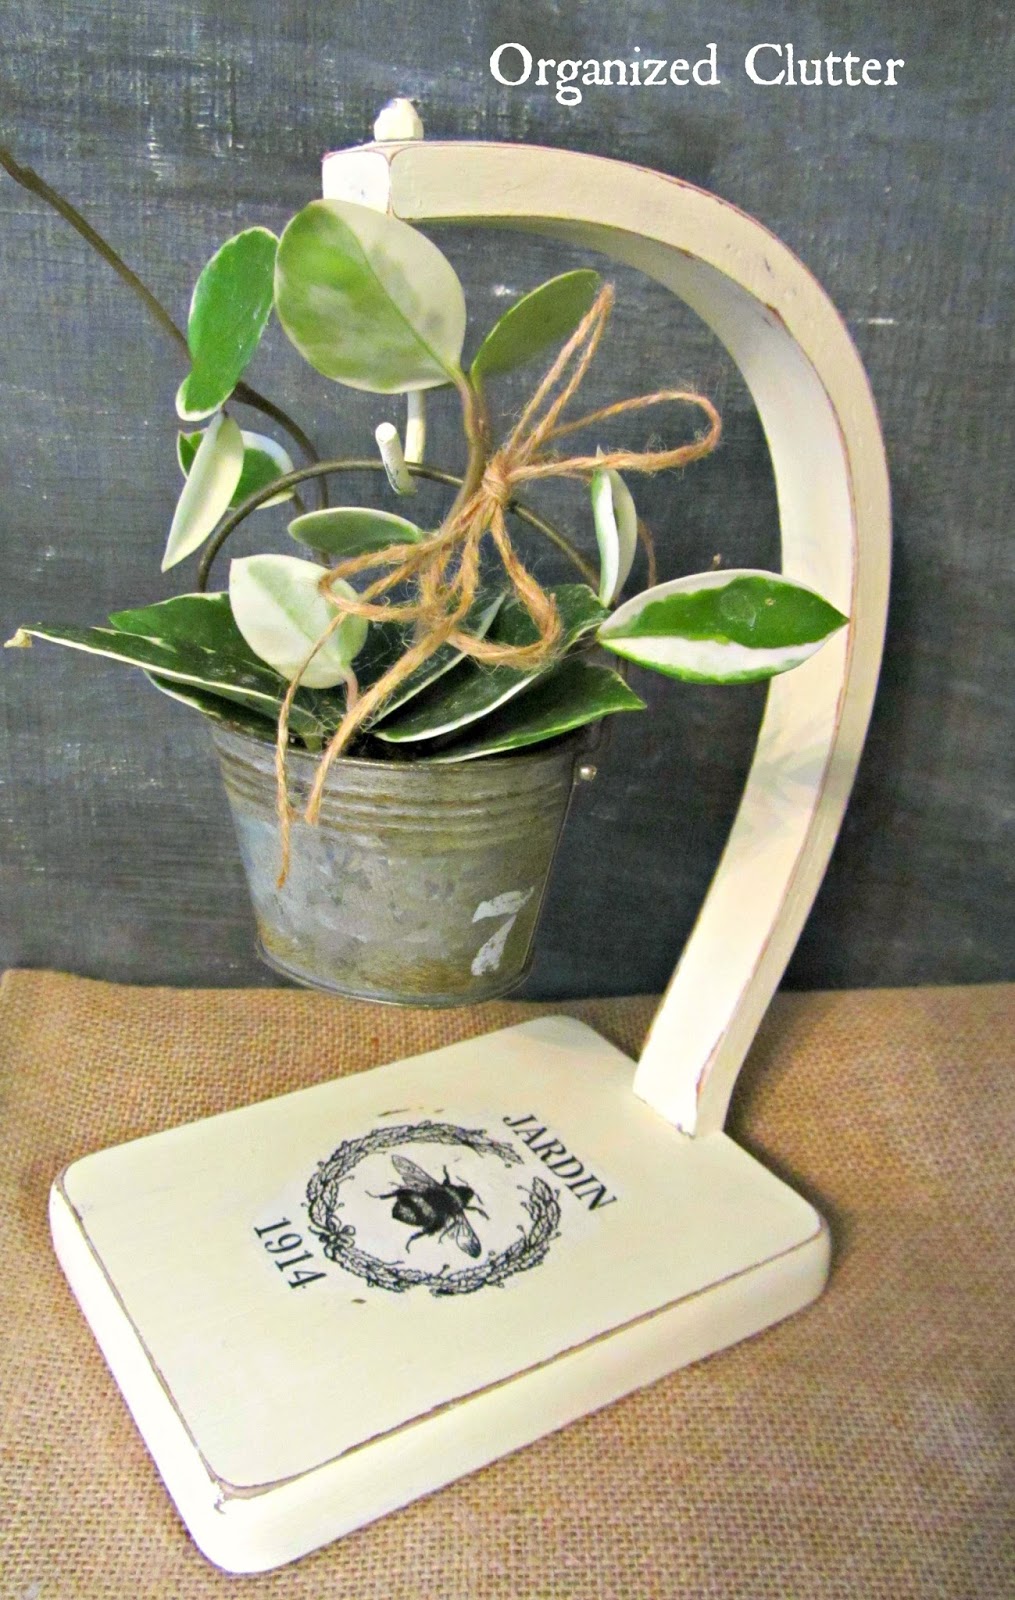 Wax Plant Displayed on Upcycled Banana Stand www.organizedclutterqueen.blogspot.com